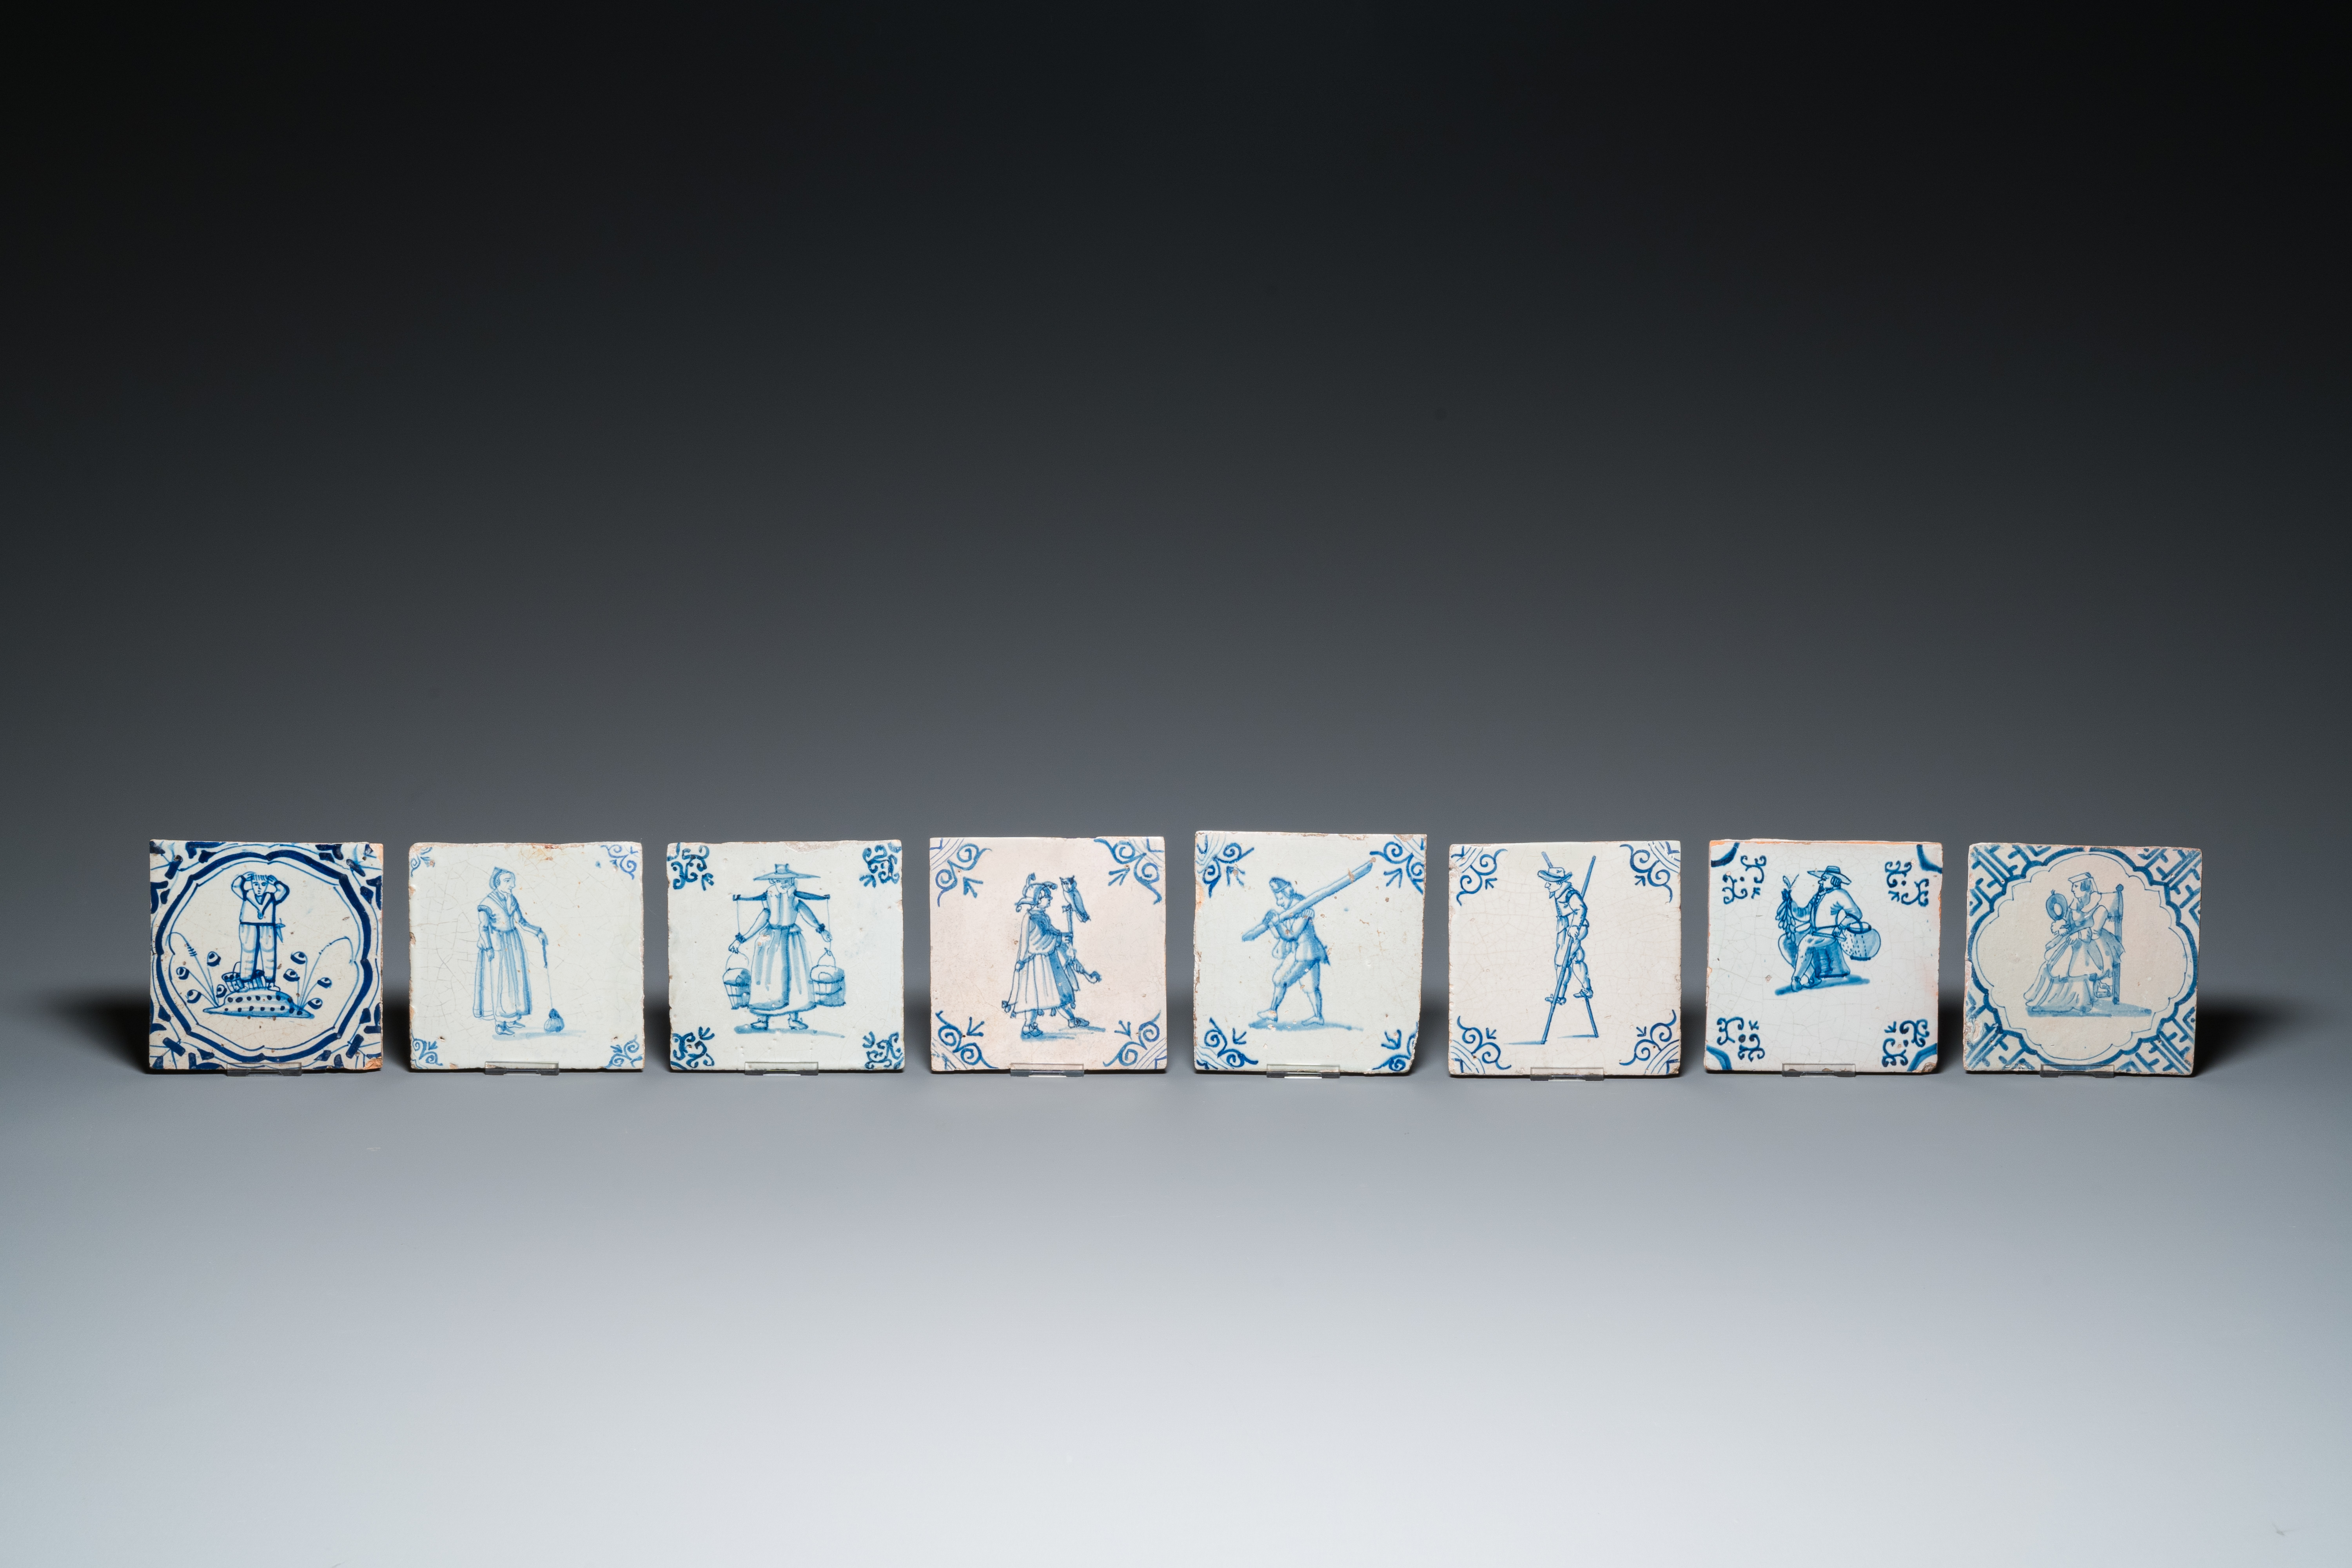 Eight Dutch Delft blue and white tiles with a jester, craftsmen at work and playing children, 17th C - Image 2 of 3